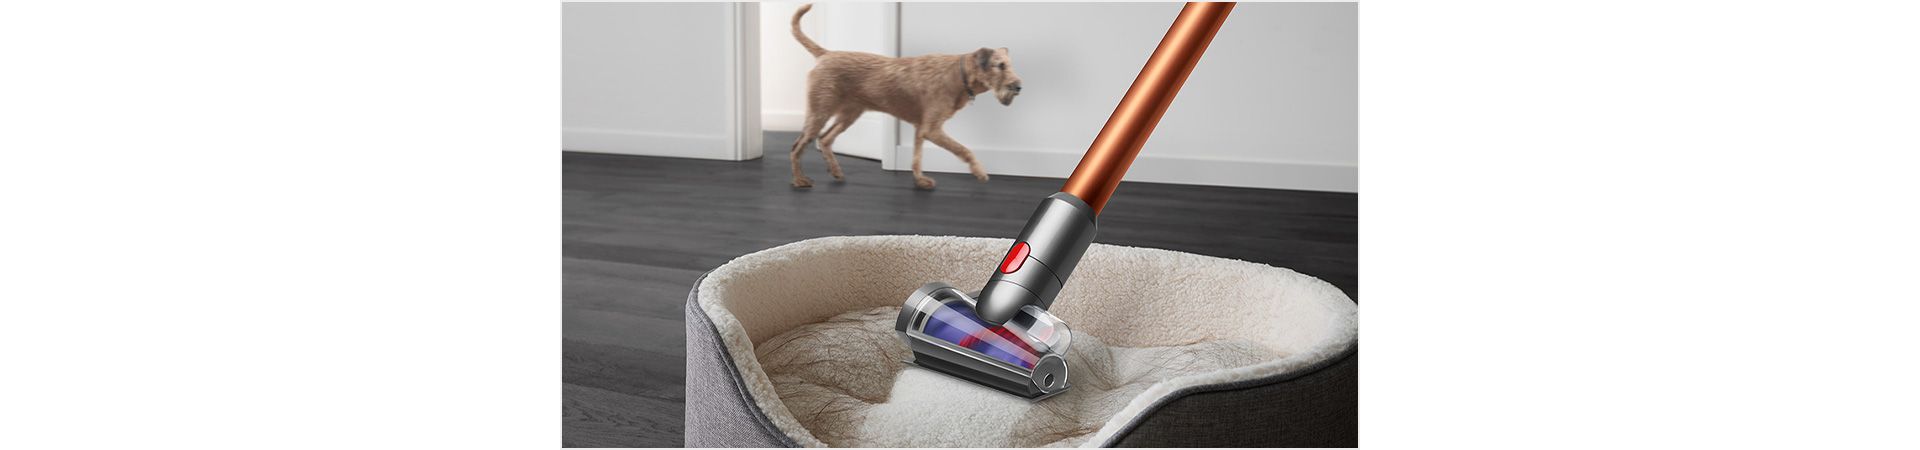 Buy Dyson SV30 V12 Detect Slim Absolute Vacuum Cleaner With Three Power  Modes, LCD Screen, Easy To Maintain At Best Price In India